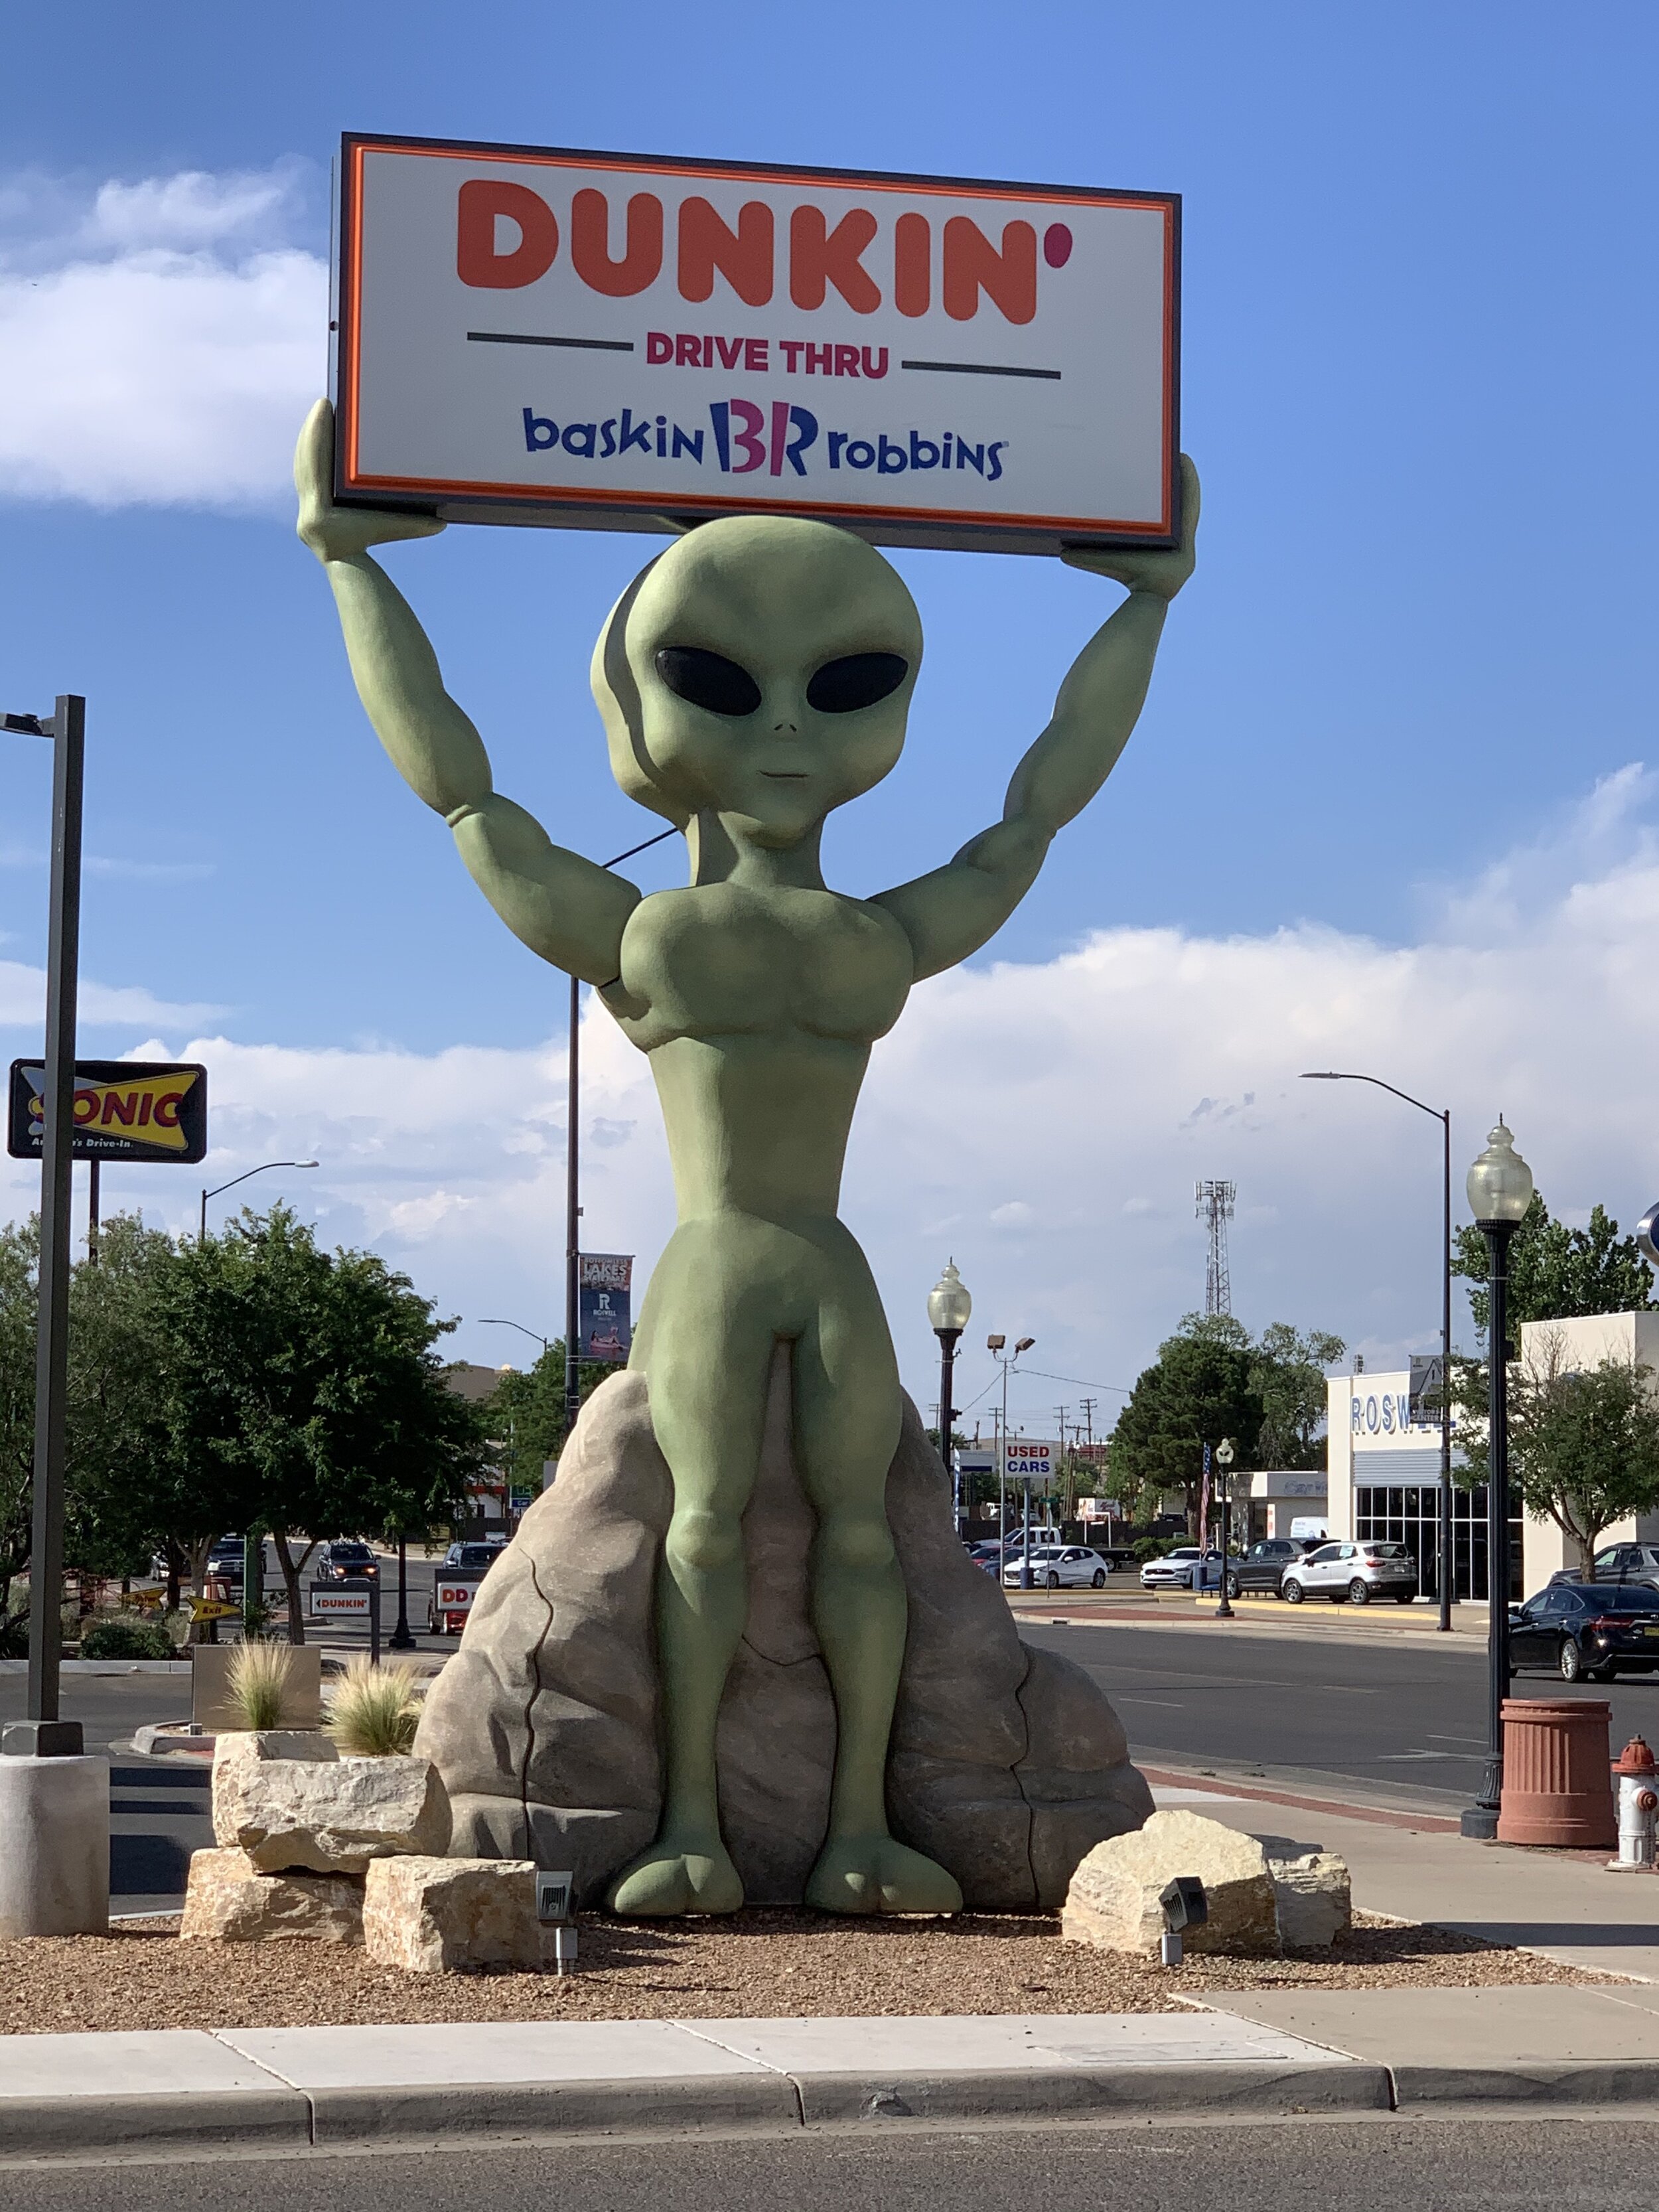  The whole town of Roswell takes their alien heritage very seriously! 